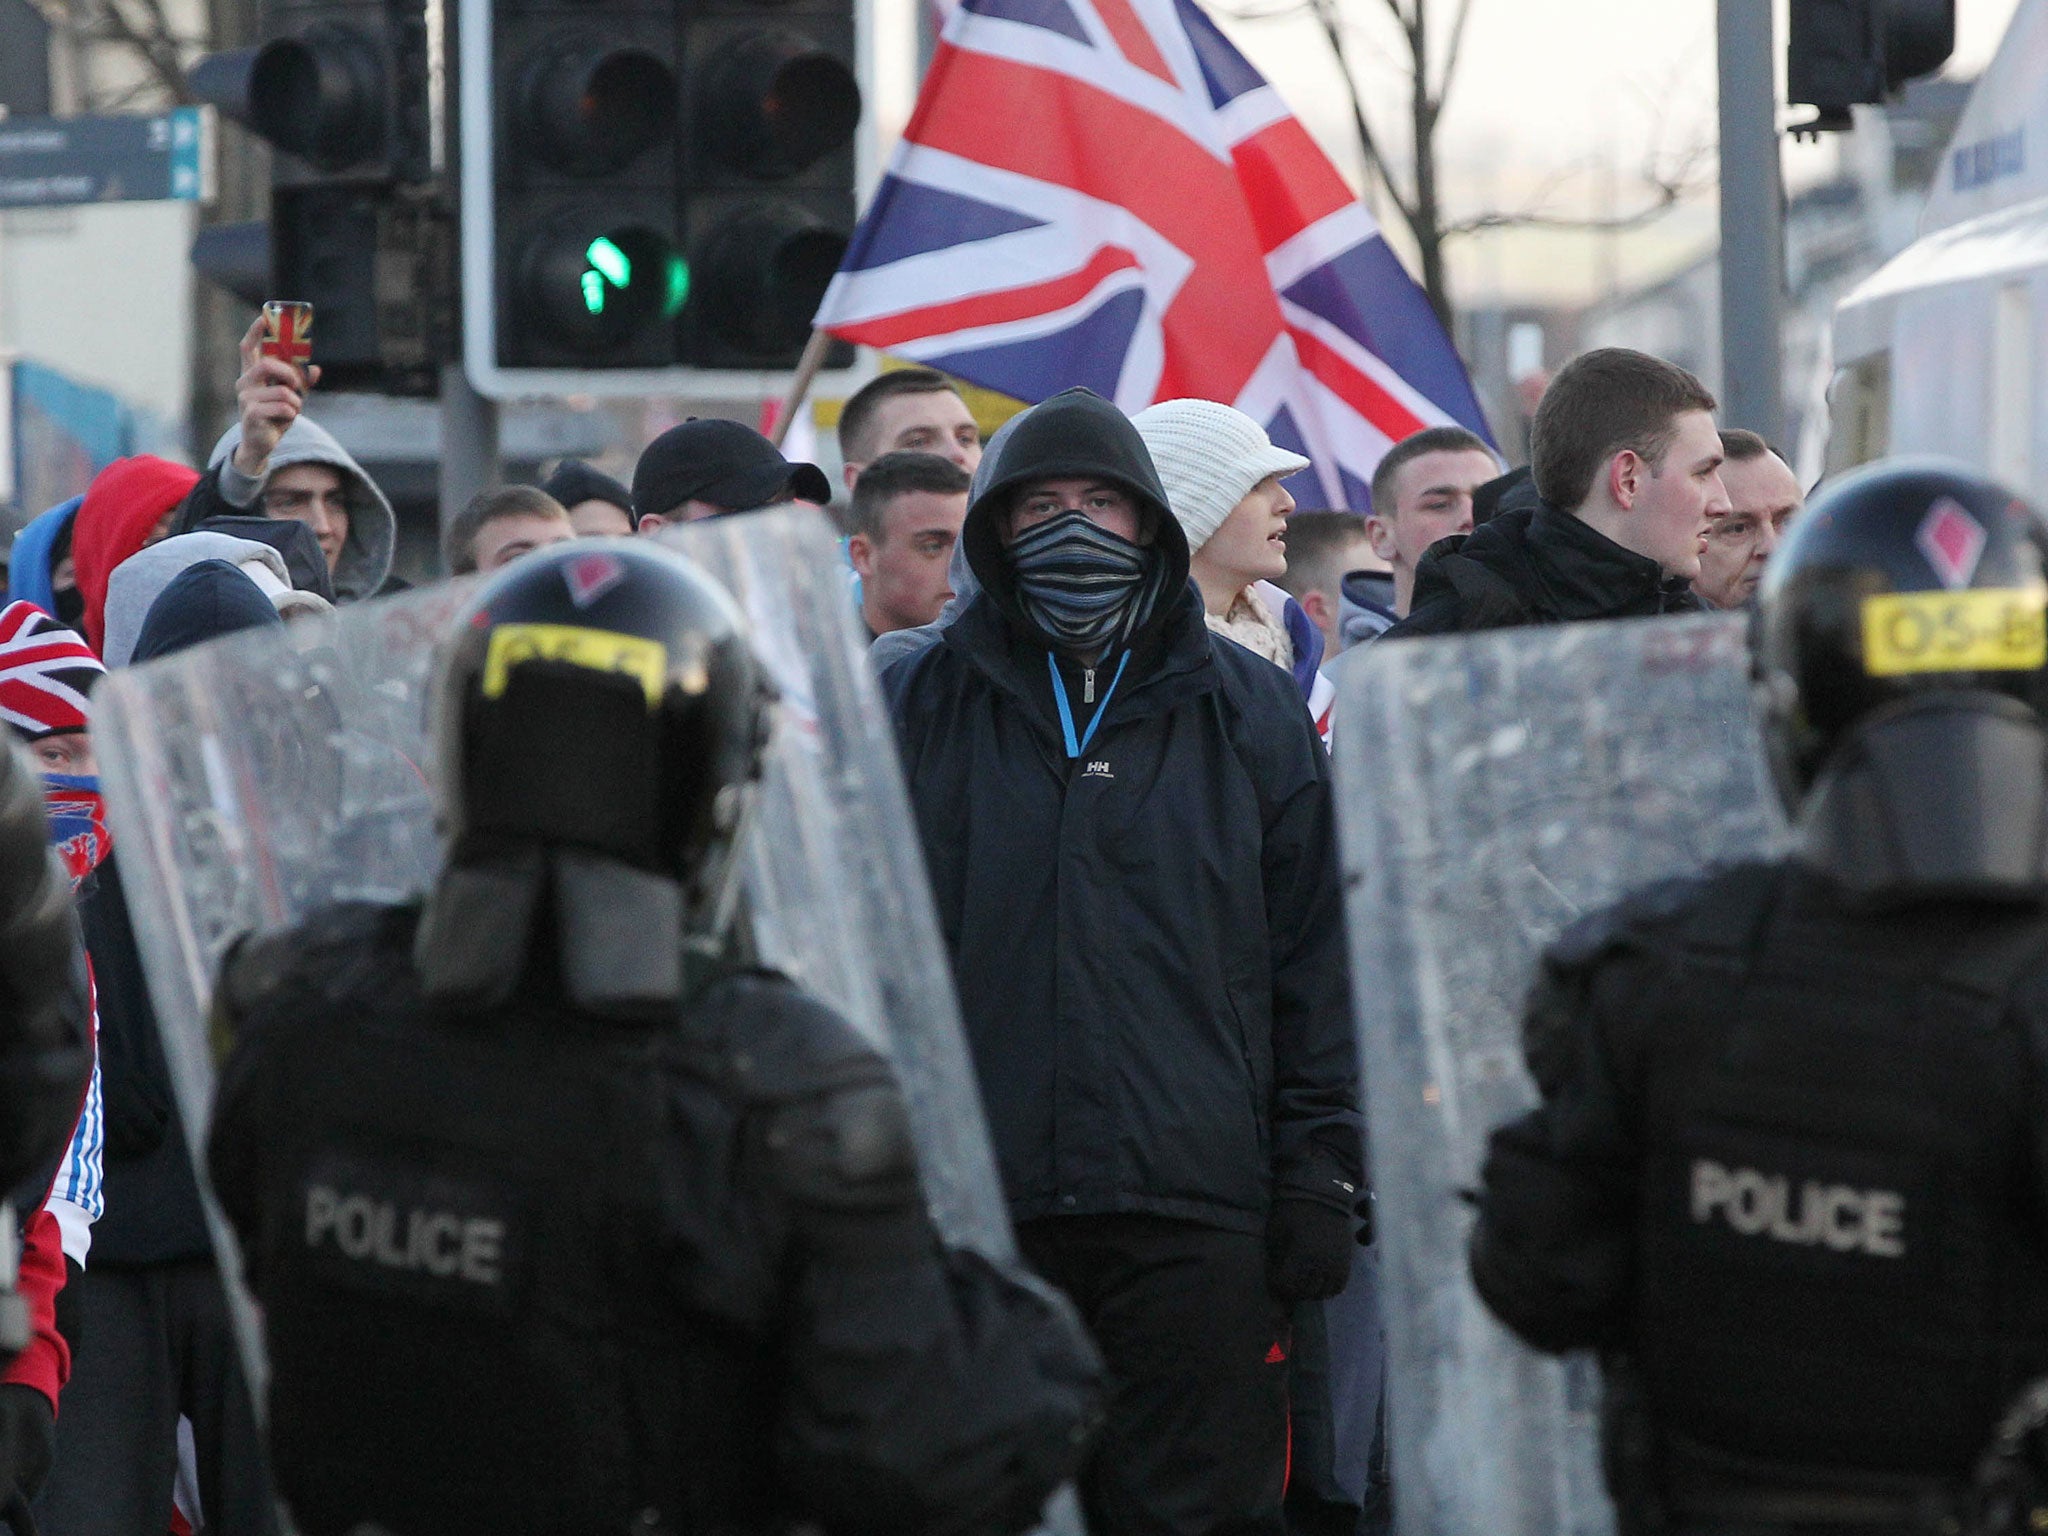 Loyalist protesters with Union flags in East Belfast in January 2012